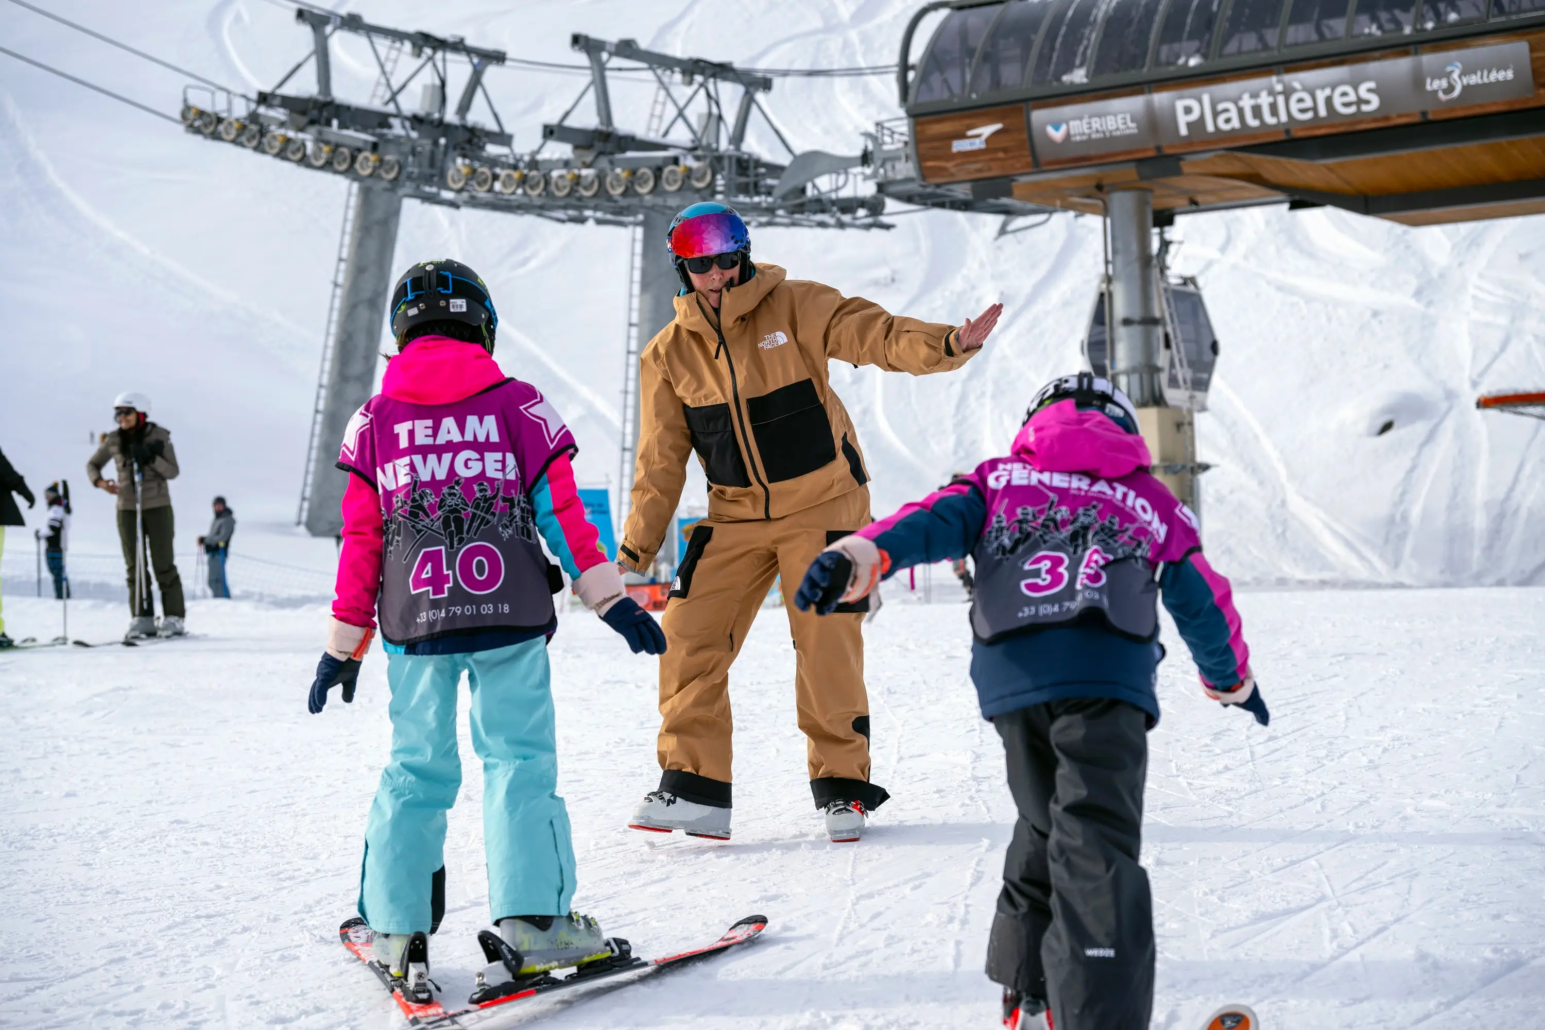 Children learning to ski in wallabies